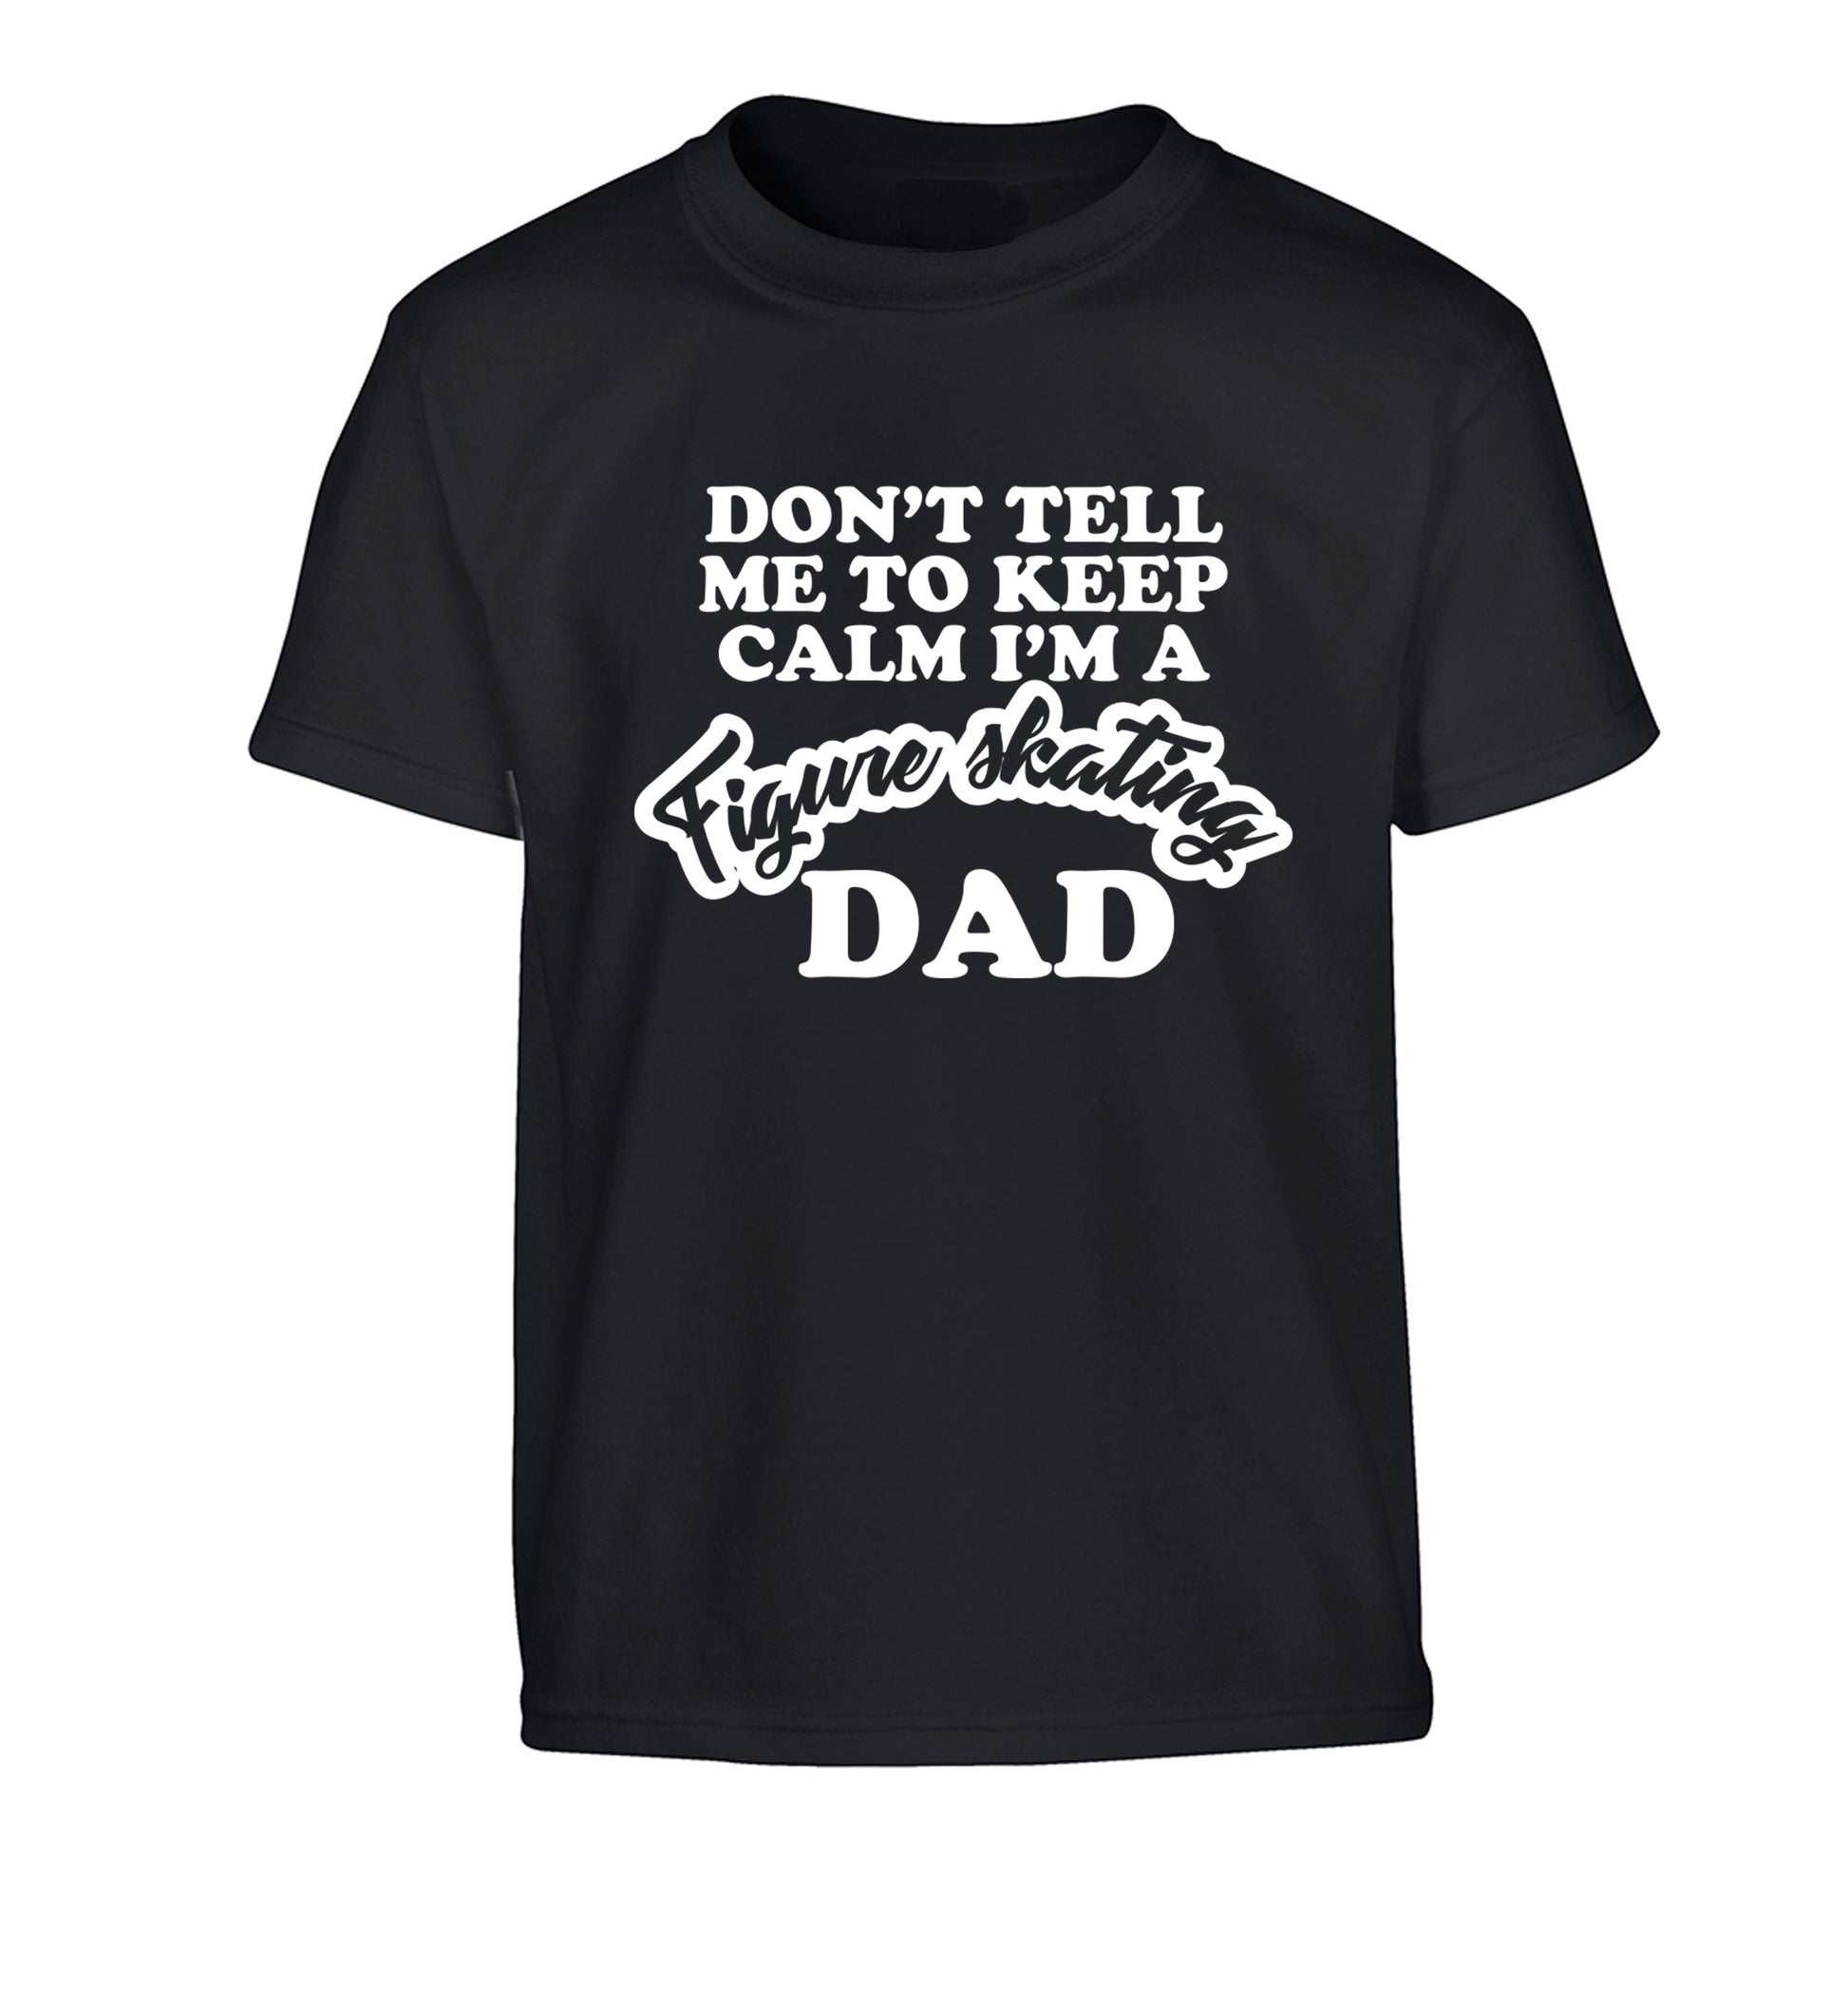 Don't tell me to keep calm I'm a figure skating dad Children's black Tshirt 12-14 Years